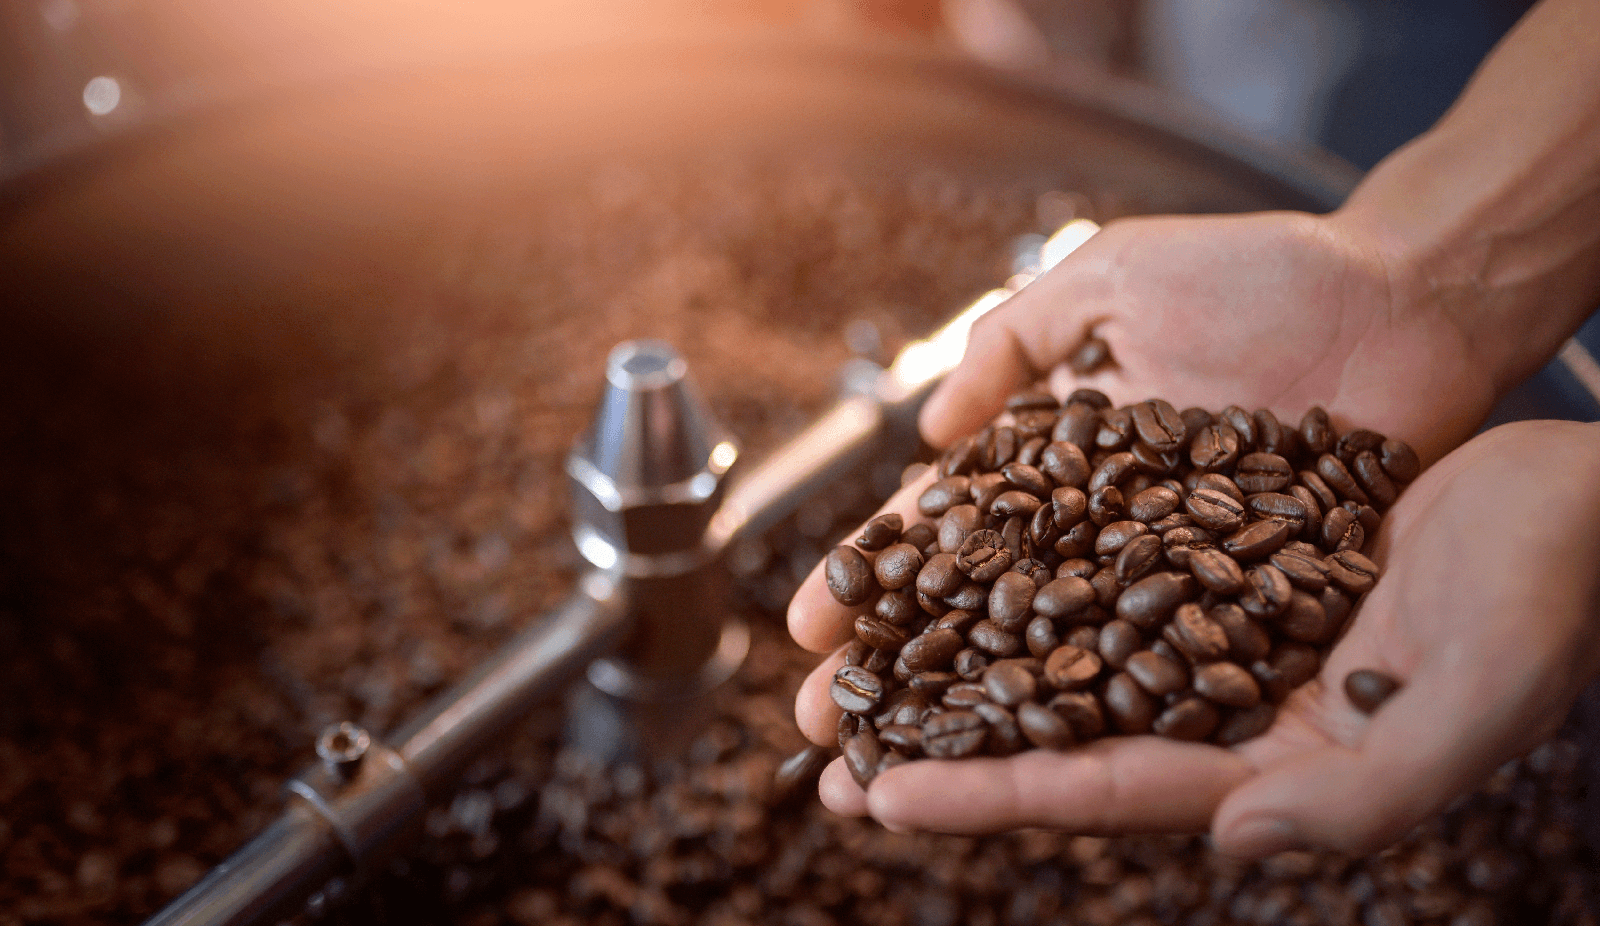 Coffee and beverage maker teams with JLLT to execute more efficient M&A